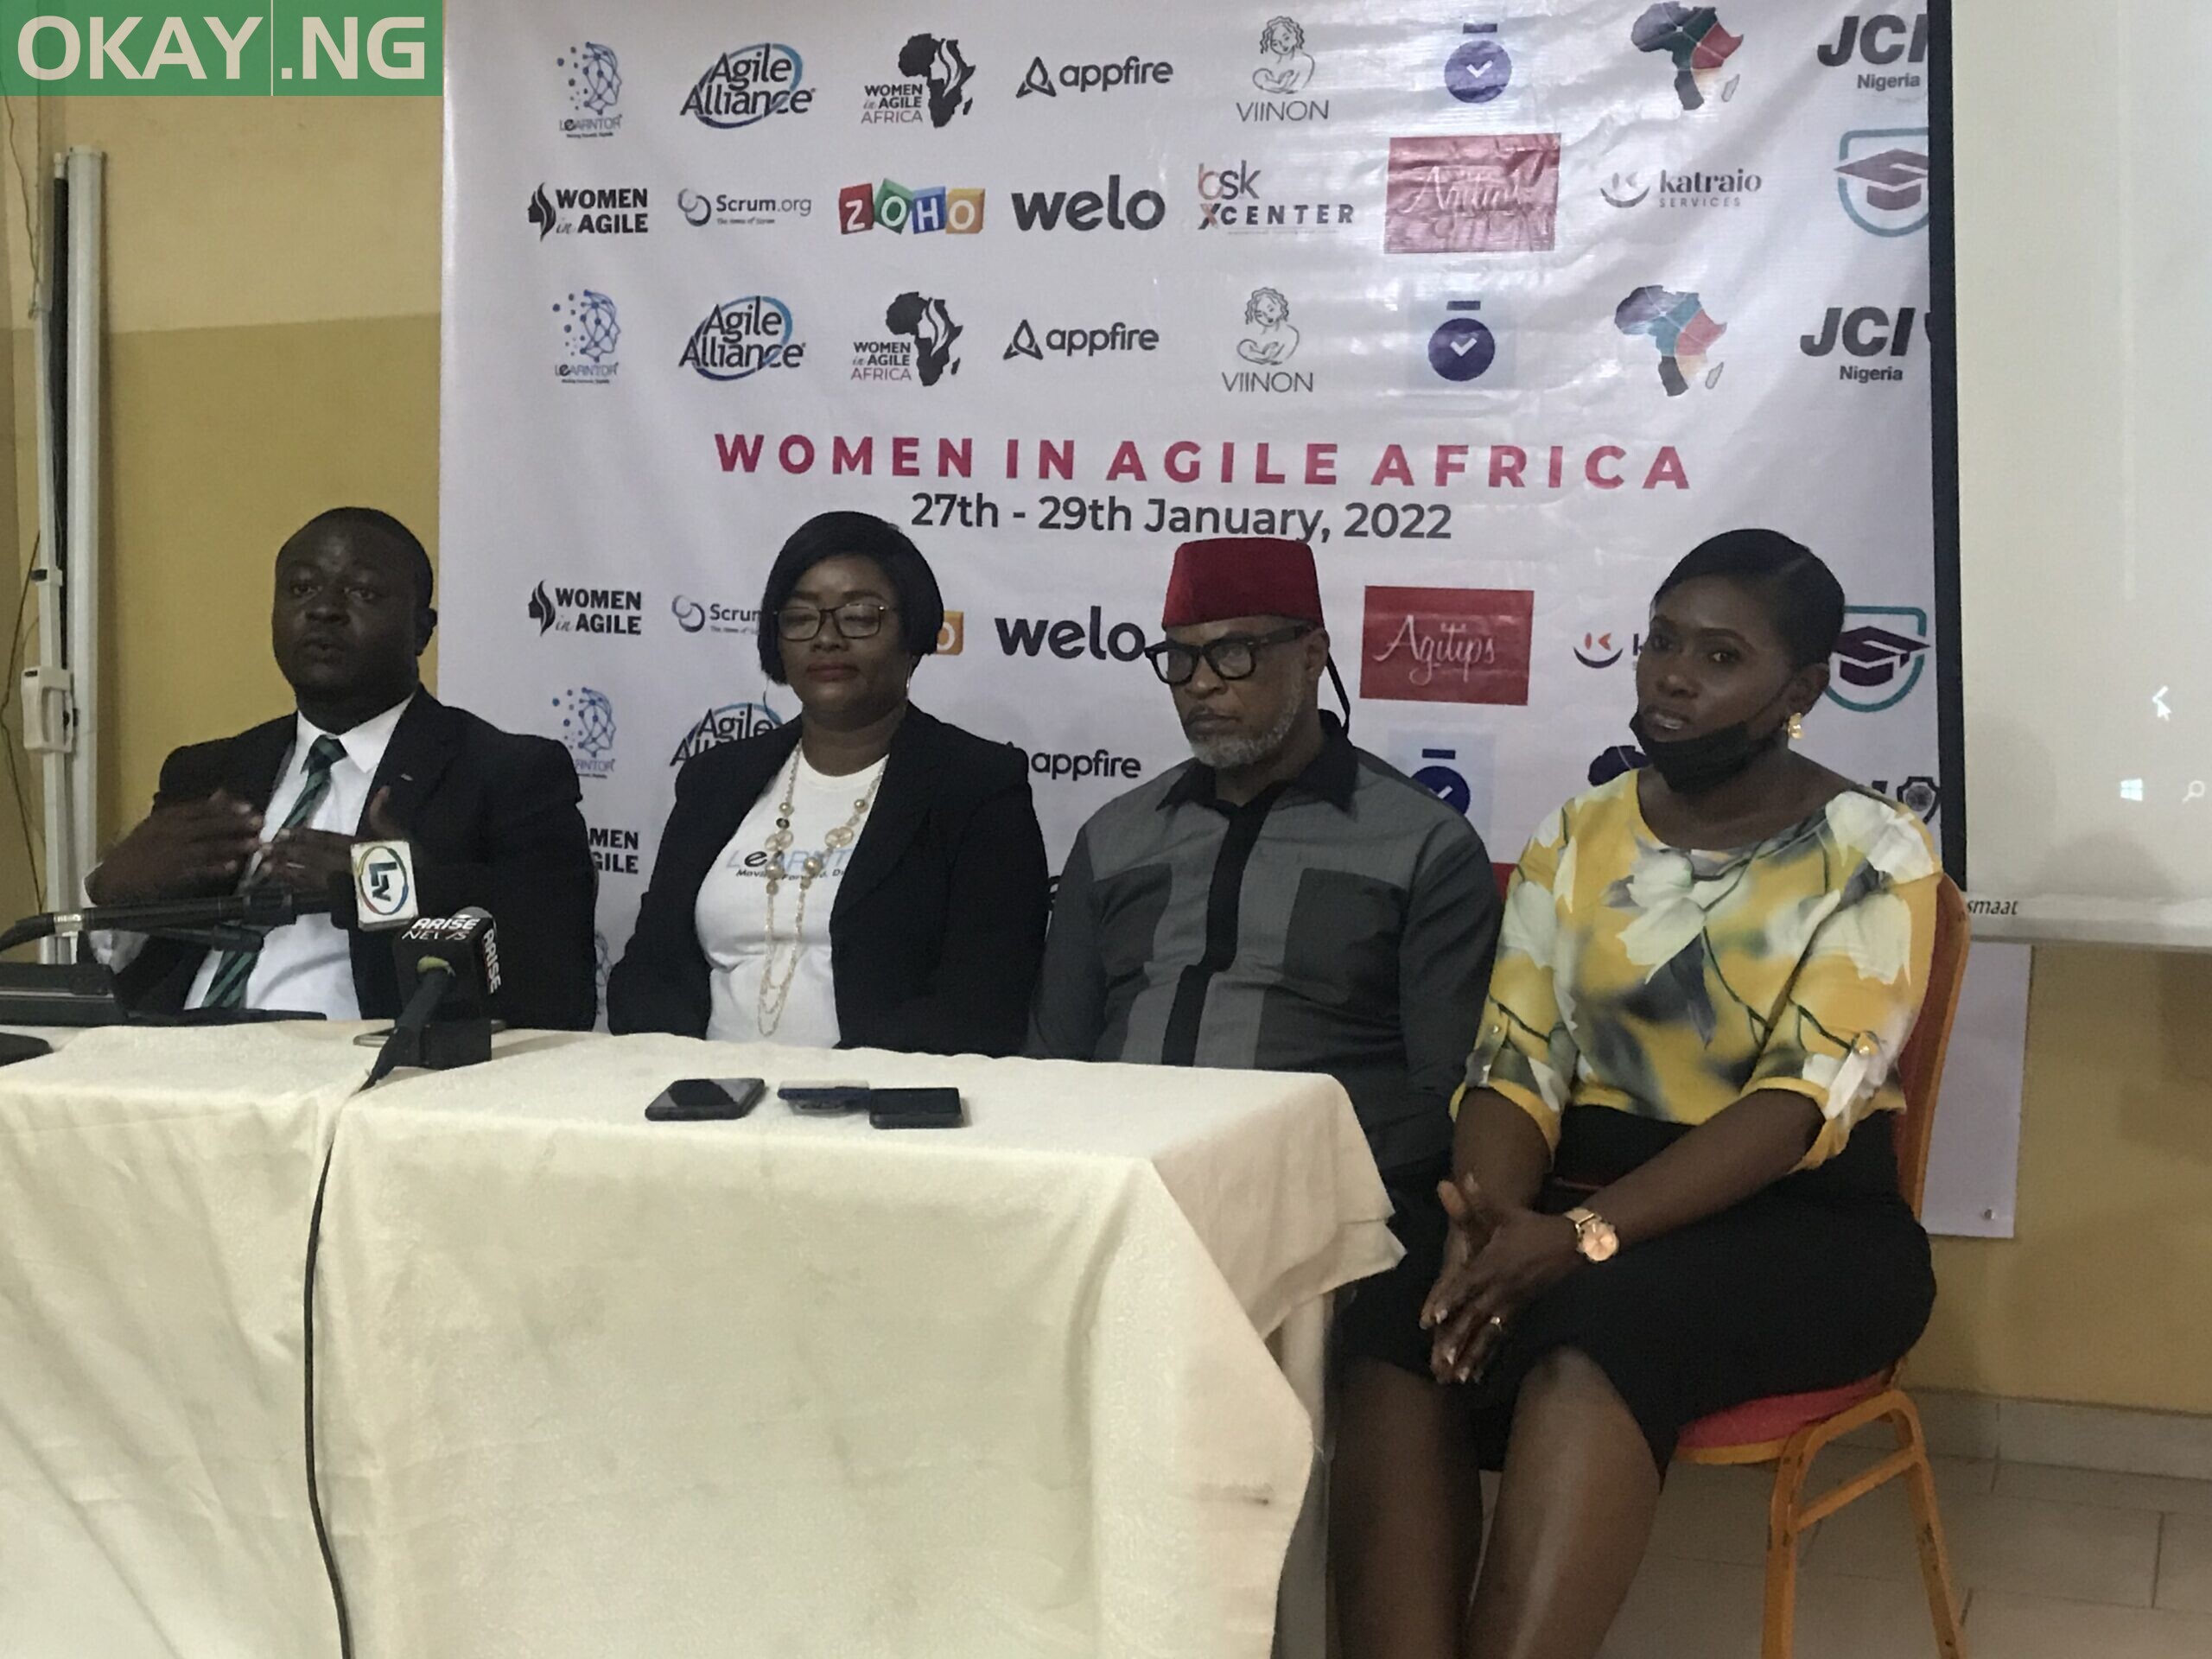 L-R: Olawale Bakare, National President, Junior Chamber International, Nigeria, Mercy George-Igbafe, Convener of Women in Agile Africa Conference/Founder of LEARNTOR, Mr Fred Amata, FilmMaker, Actor, Director/ Scrumaster and Bisi Alimi, Business Analyst with LEARNTOR during press conference on Thursday in Lagos.